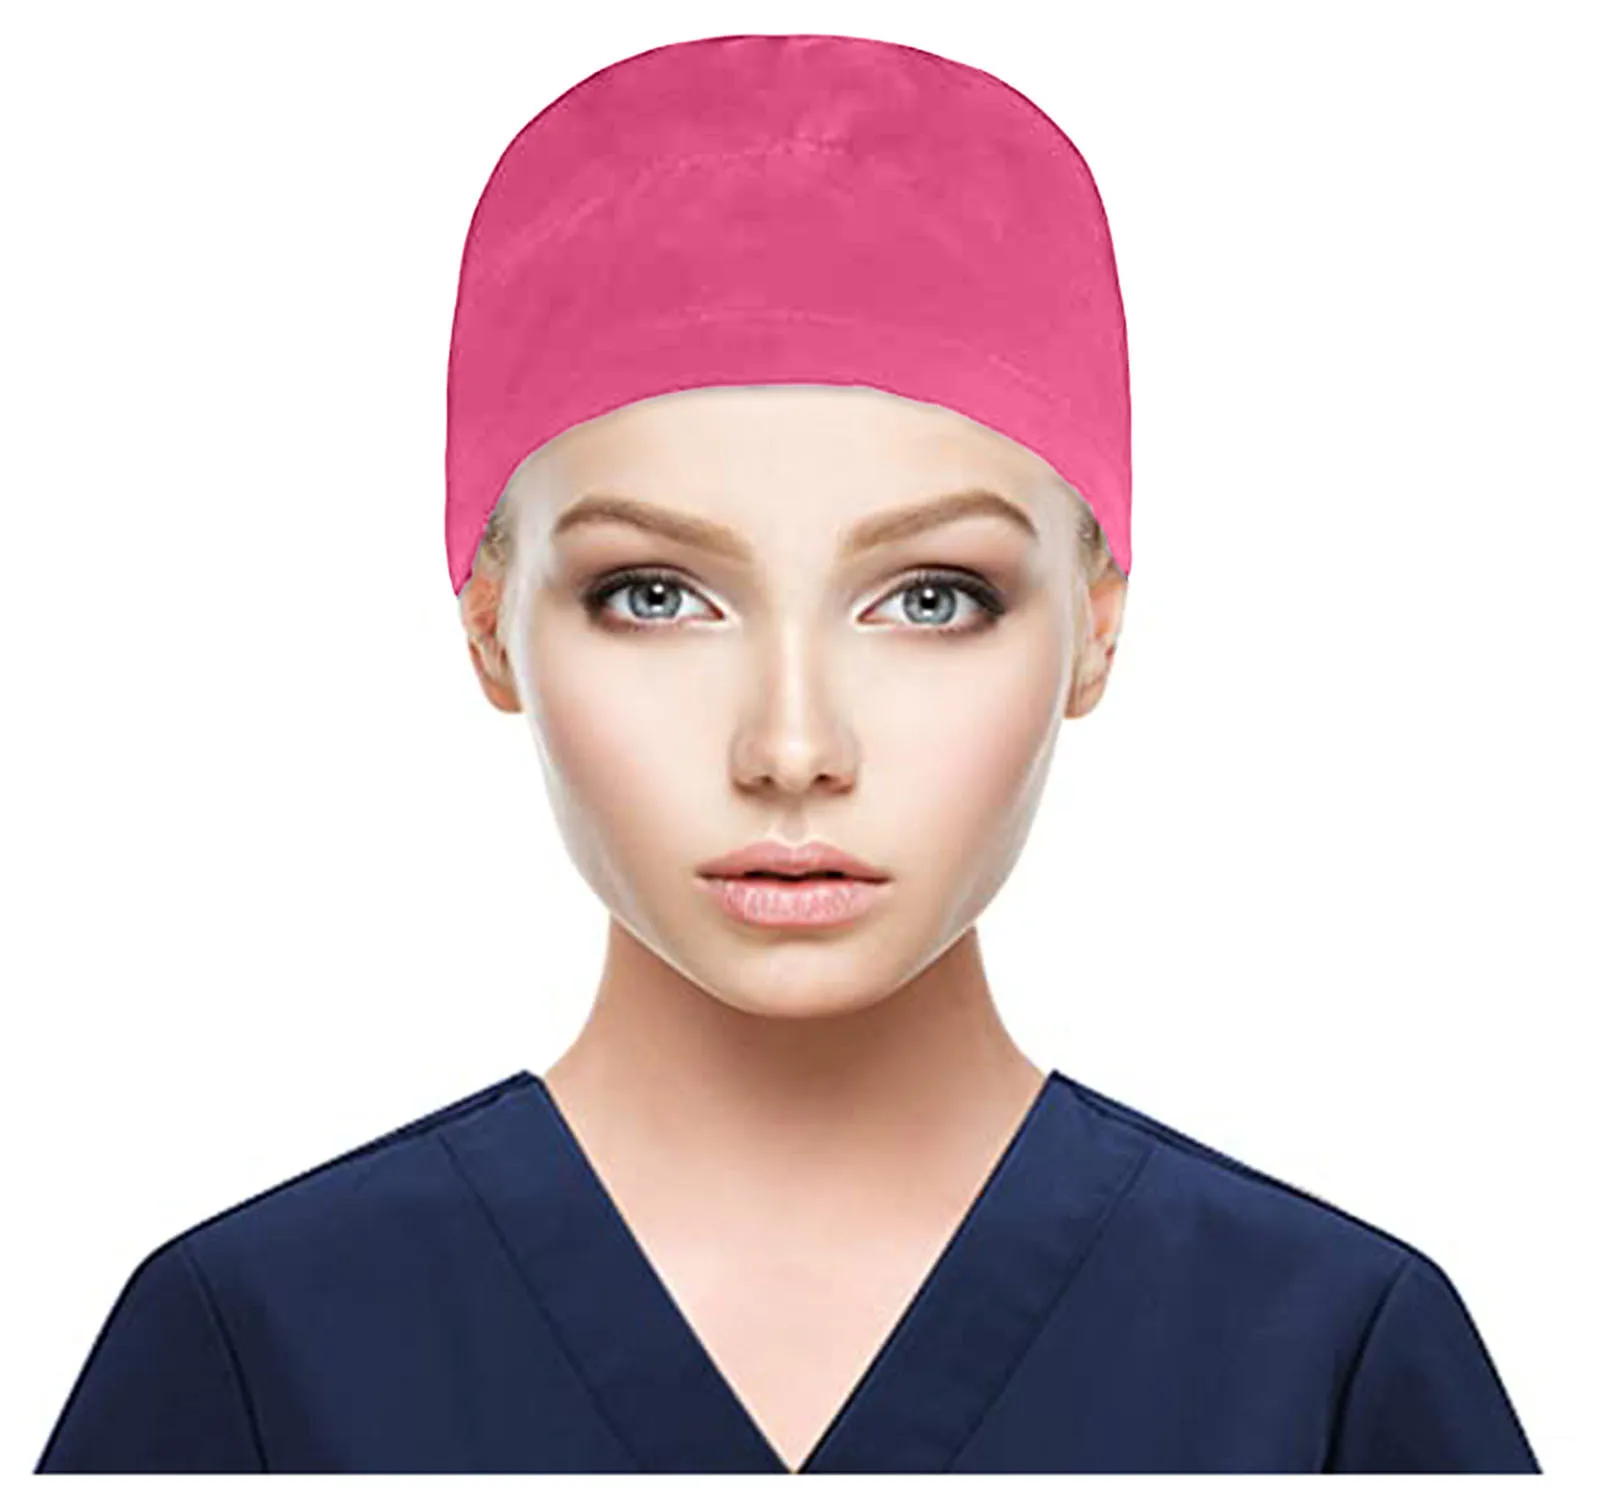 best beanie brands Working Scrub Cap with Button Sweatband Solid Nursing Hat Adjustable Tie Back Elastic Bouffant Hat Head Scarf gorros quirurgicos winter toque